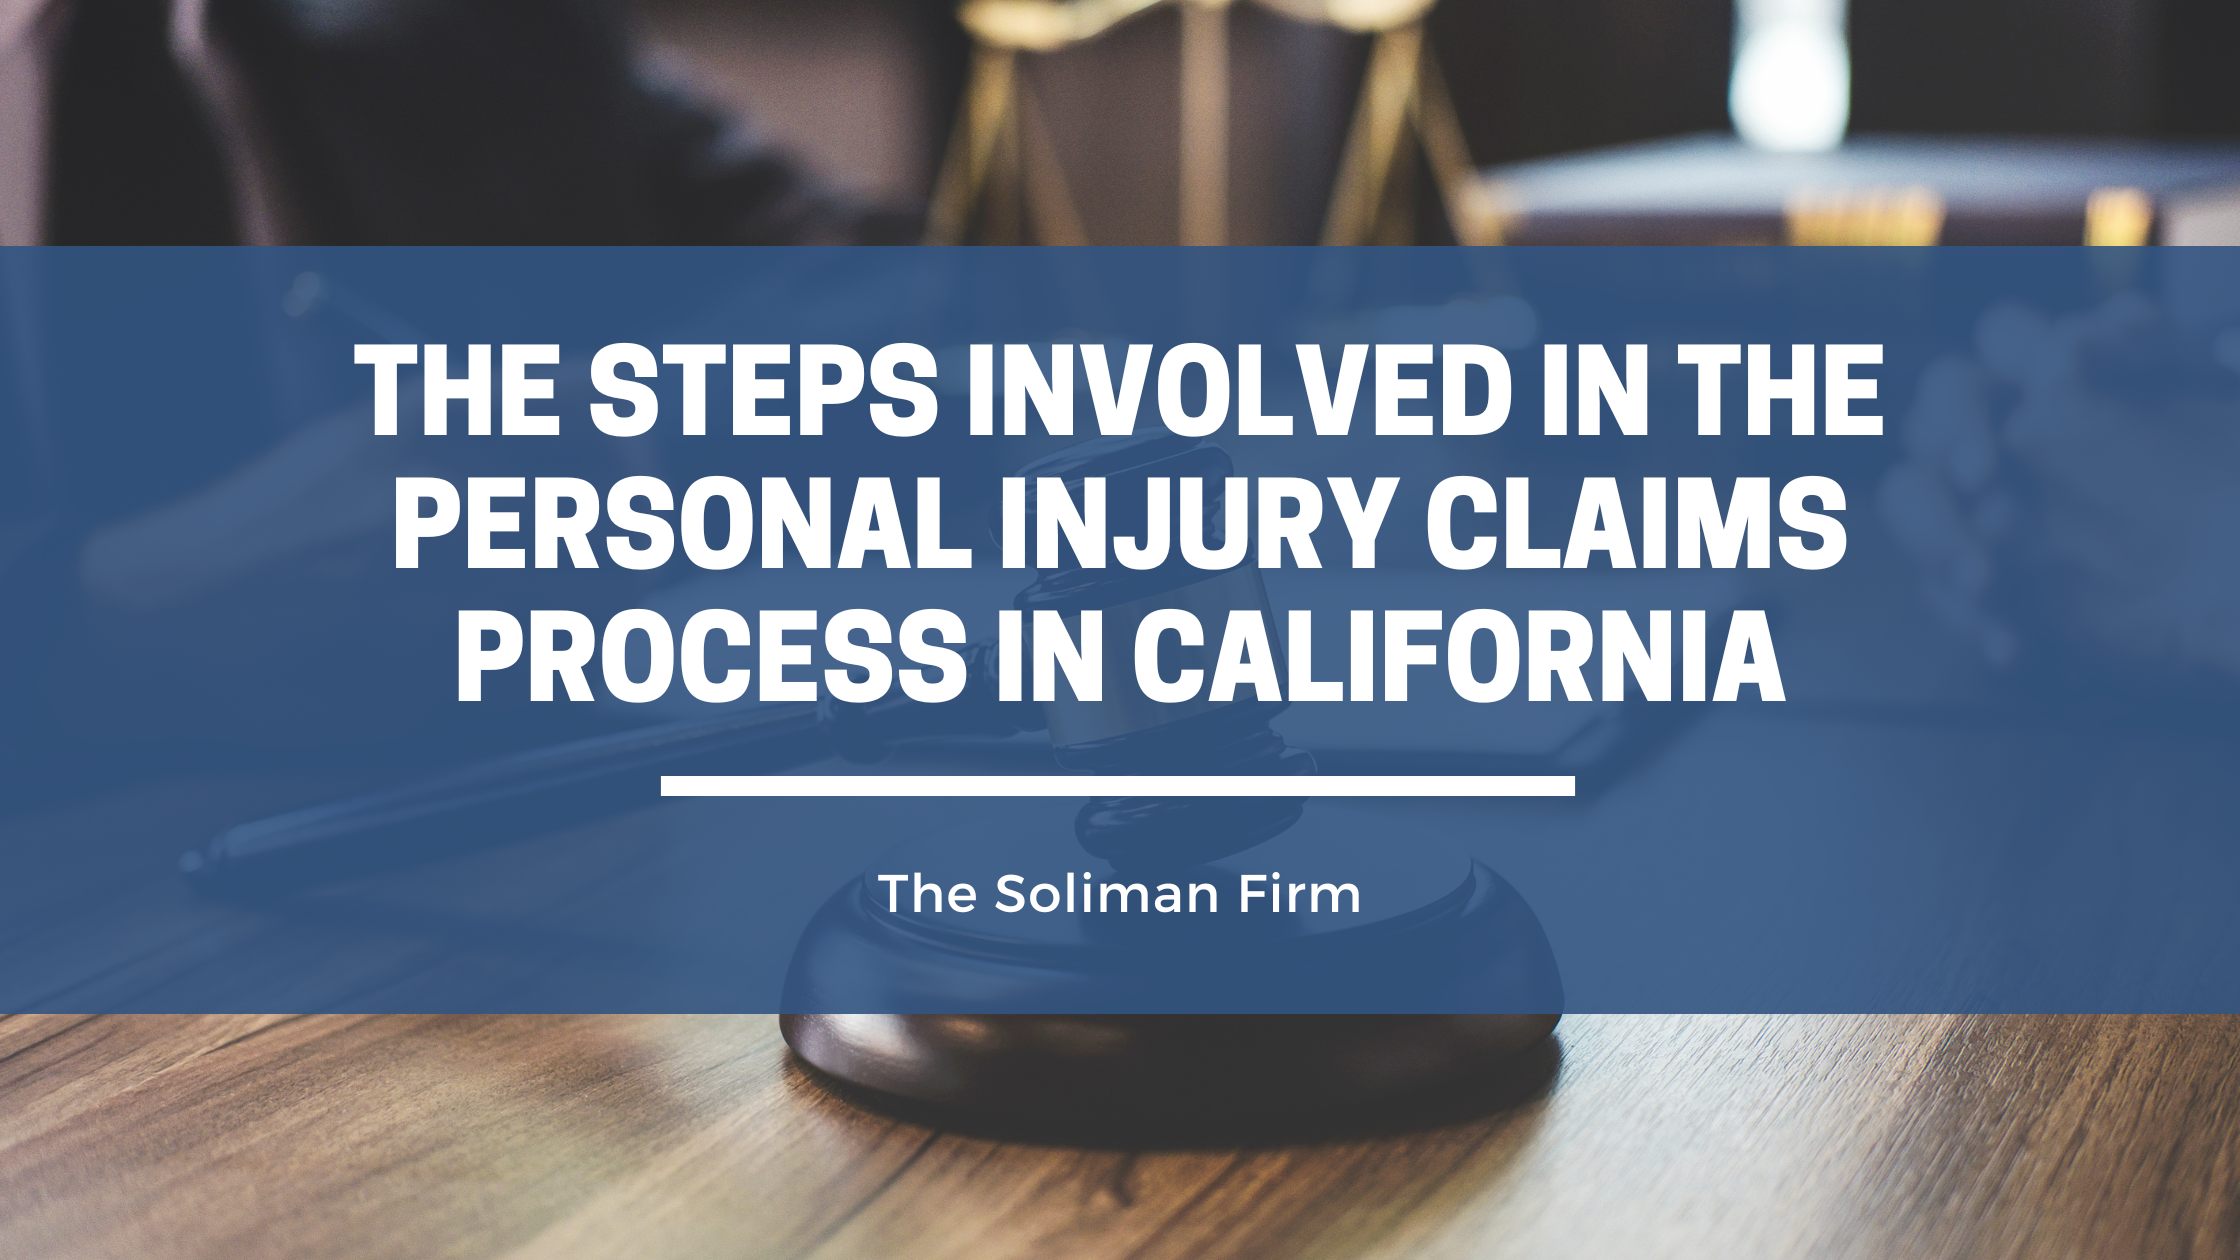 The steps involved in the personal injury claims process in California.